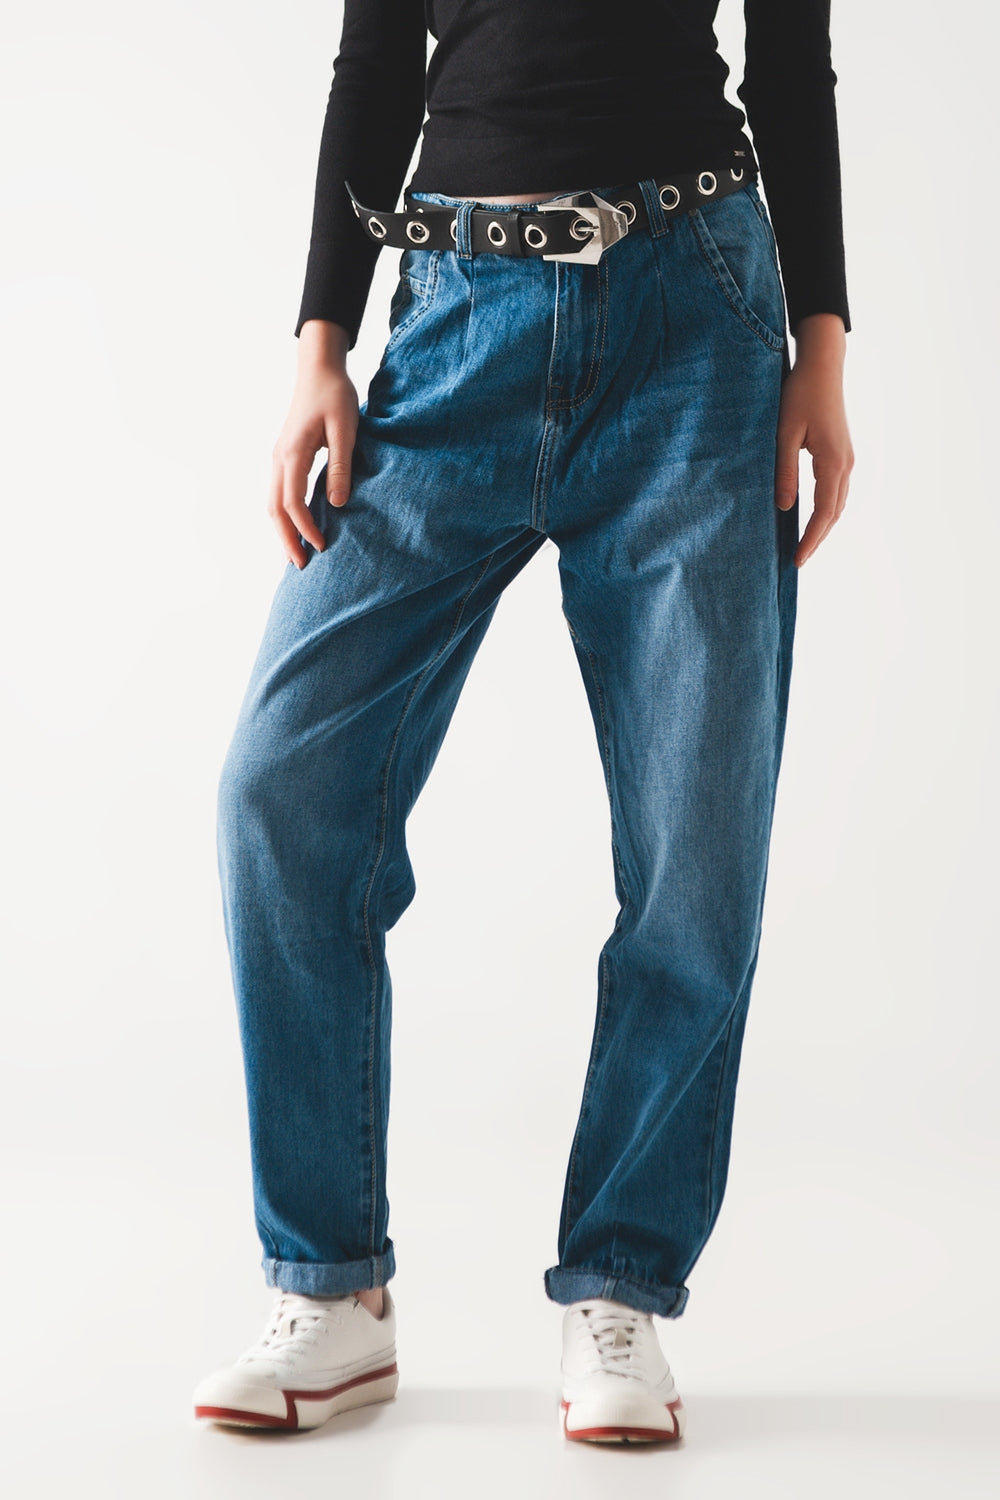 Q2 Cotton skater tapered carpenter jeans in mid wash